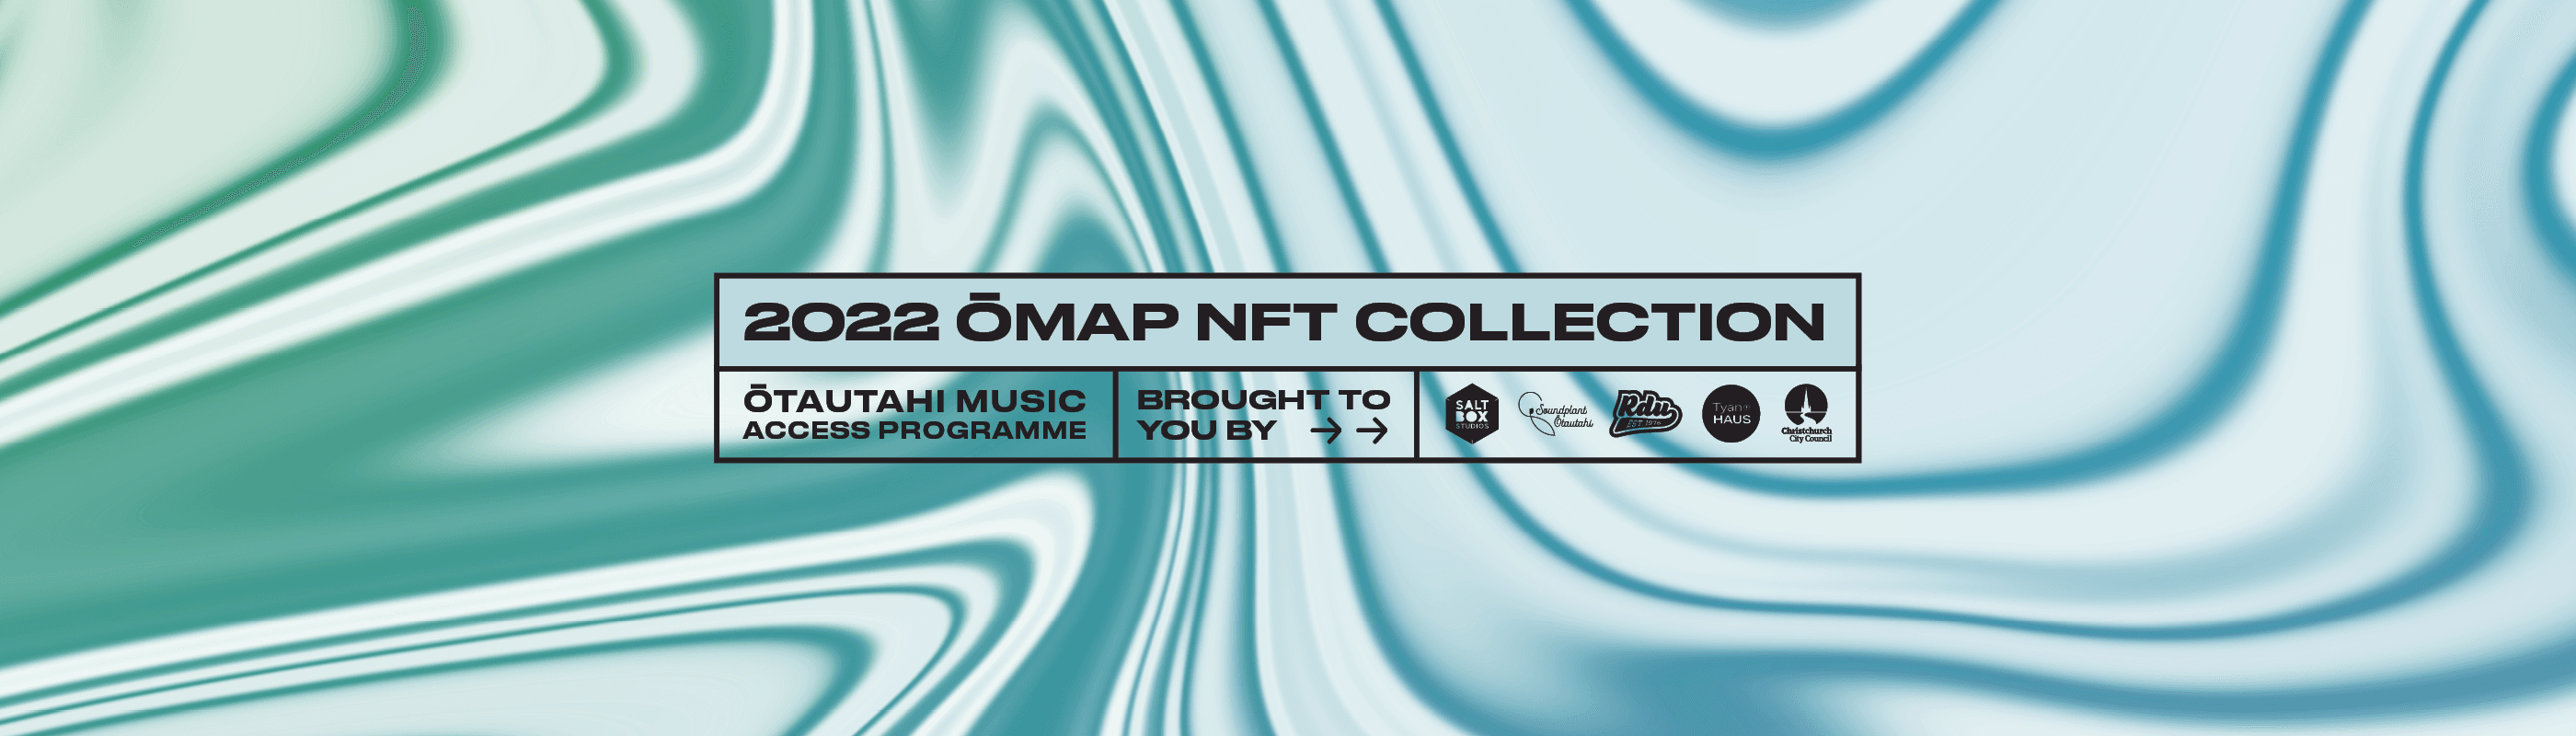 2022 OMAP NFT Collection